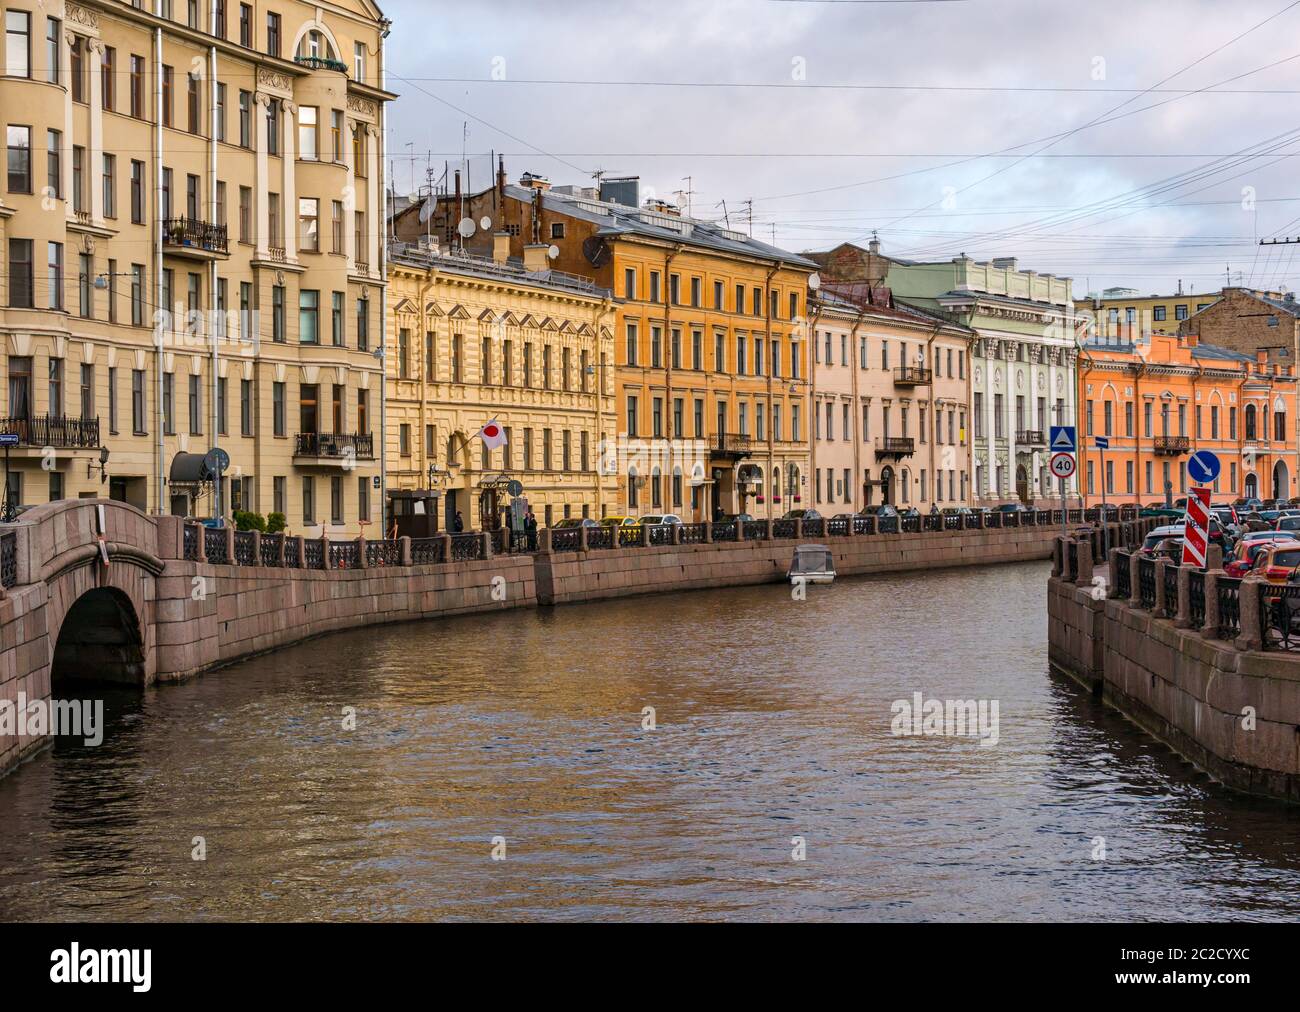 Colourful historic buildings on Moyka River Embankment, St Petersburg, Russia Stock Photo